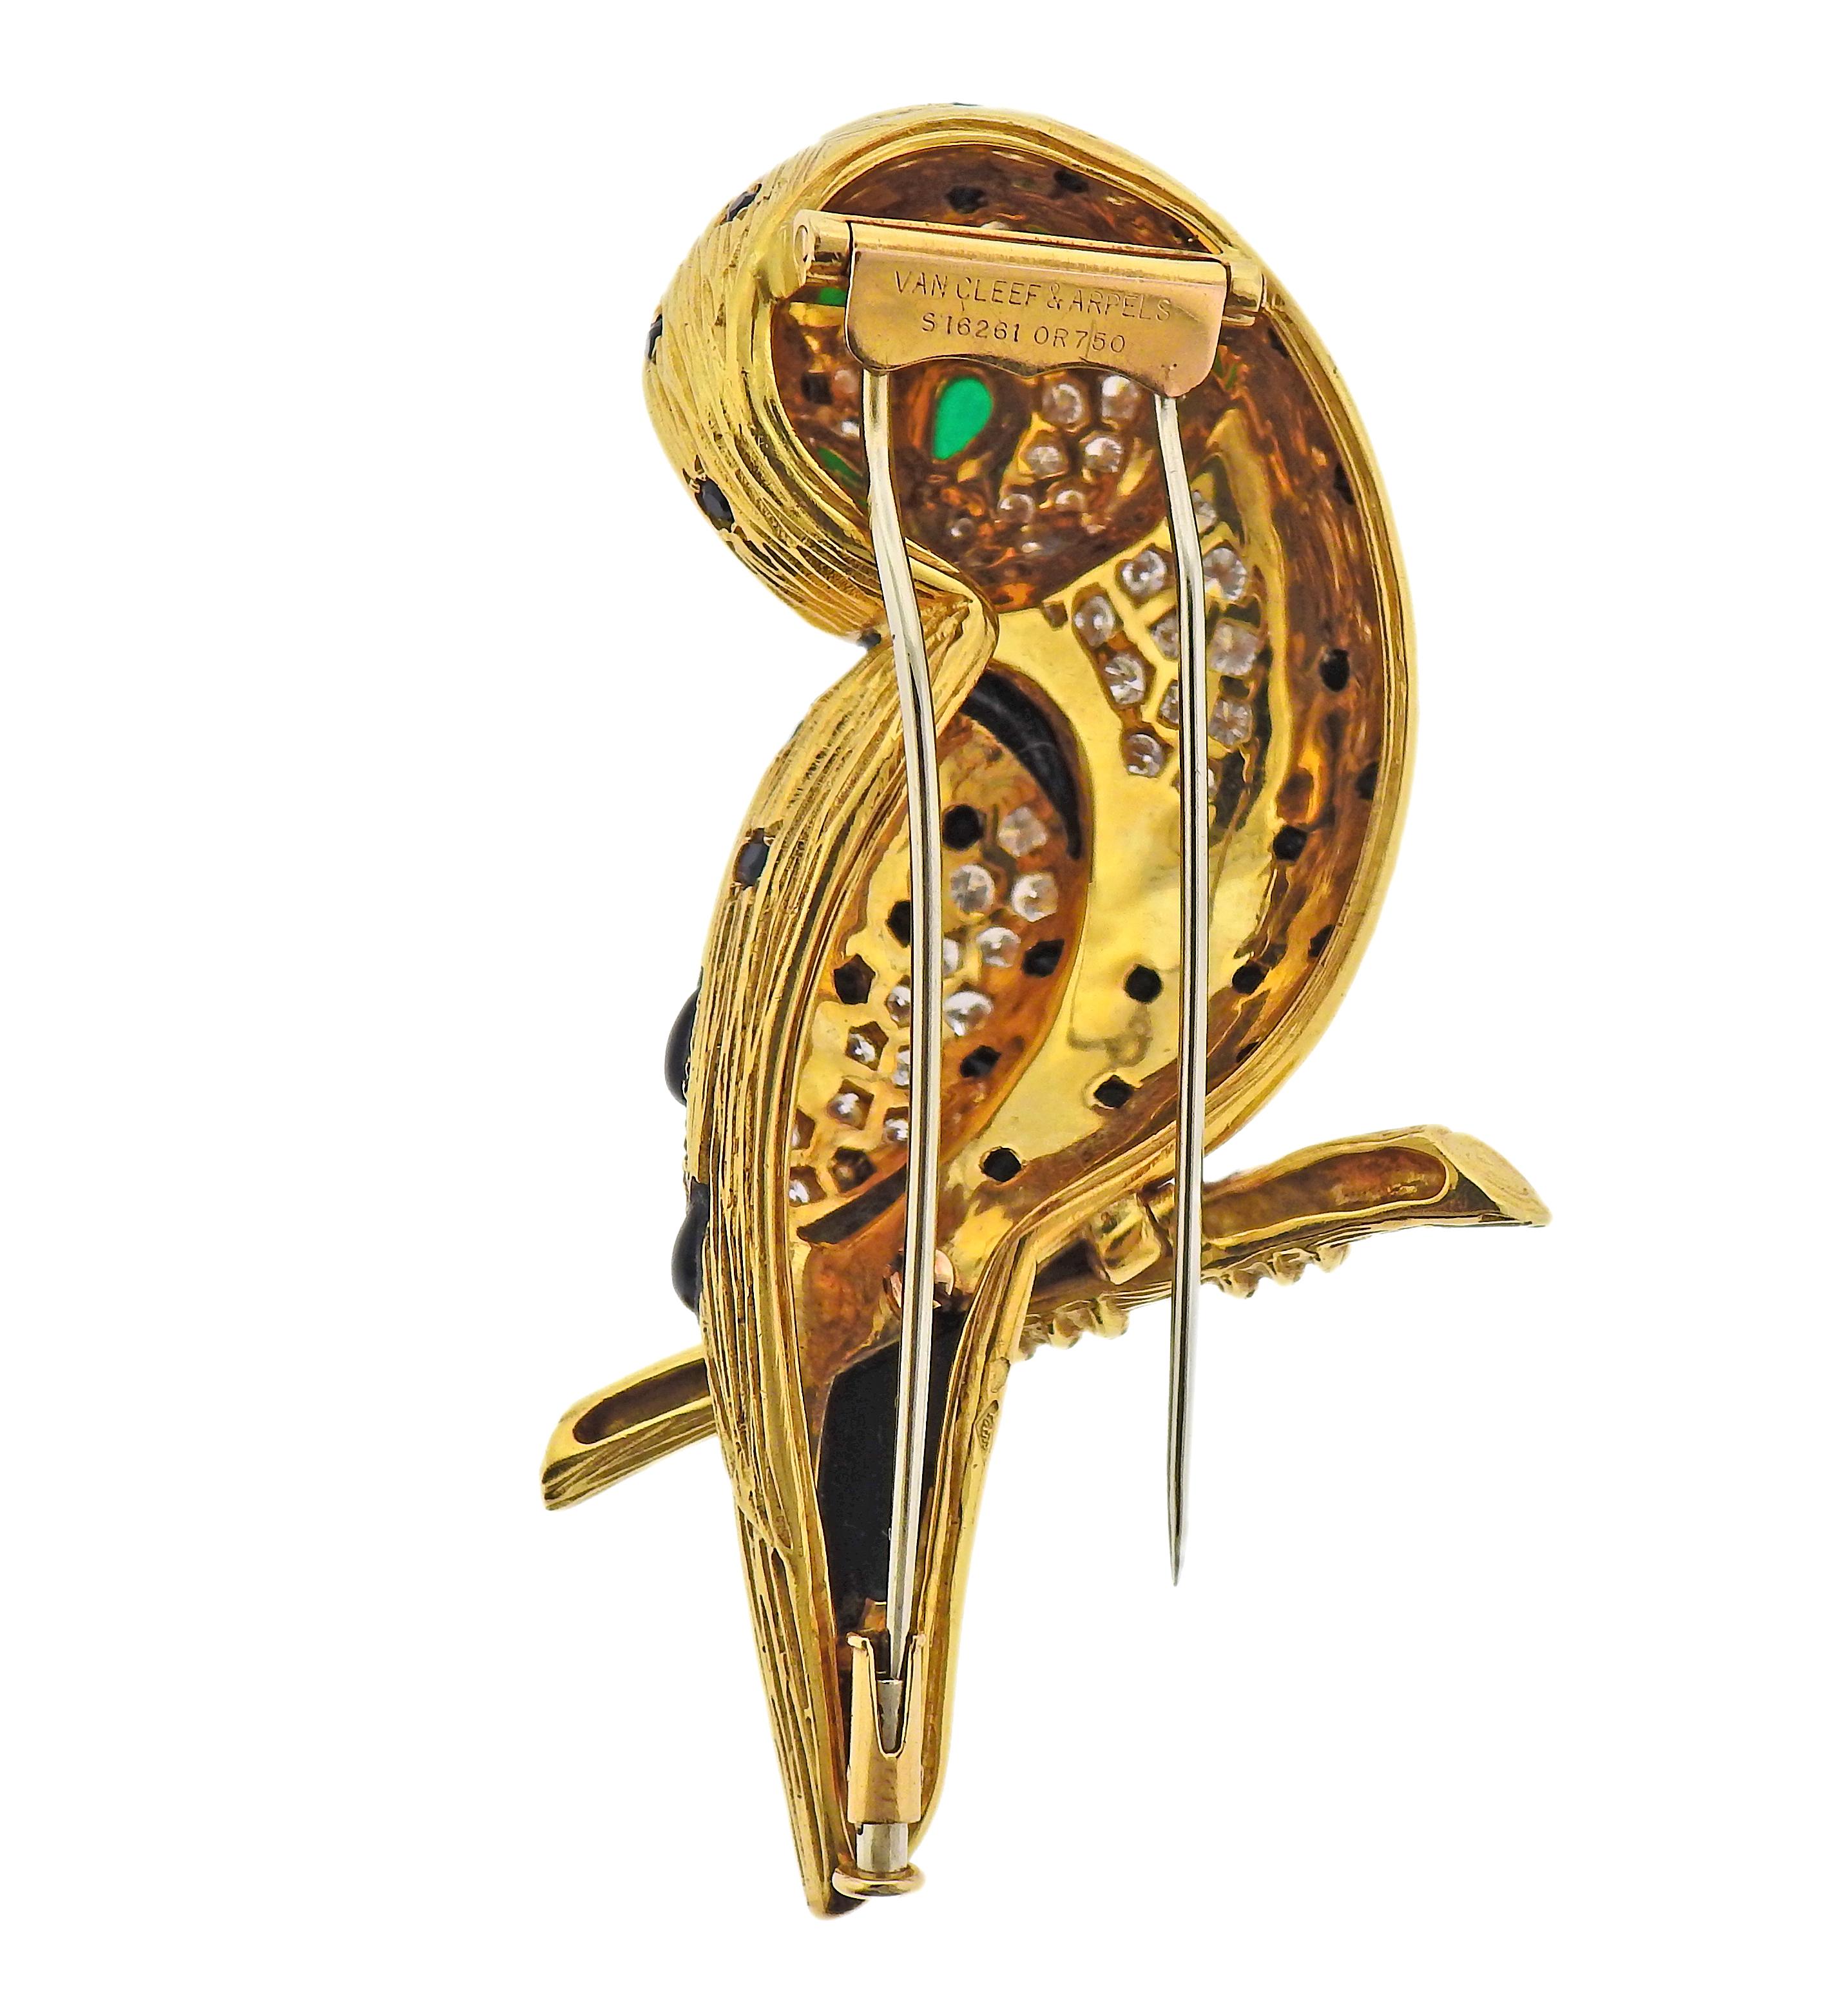 Van Cleef & Arpels 18k gold owl brooch, decorated with emerald cabochon eyes, onyx and approx. 2.20cts in diamonds. Brooch measures 62mm x 32mm. Marked: Van Cleef & Arpels, S16261,  or750. Weight - 35.9 grams.